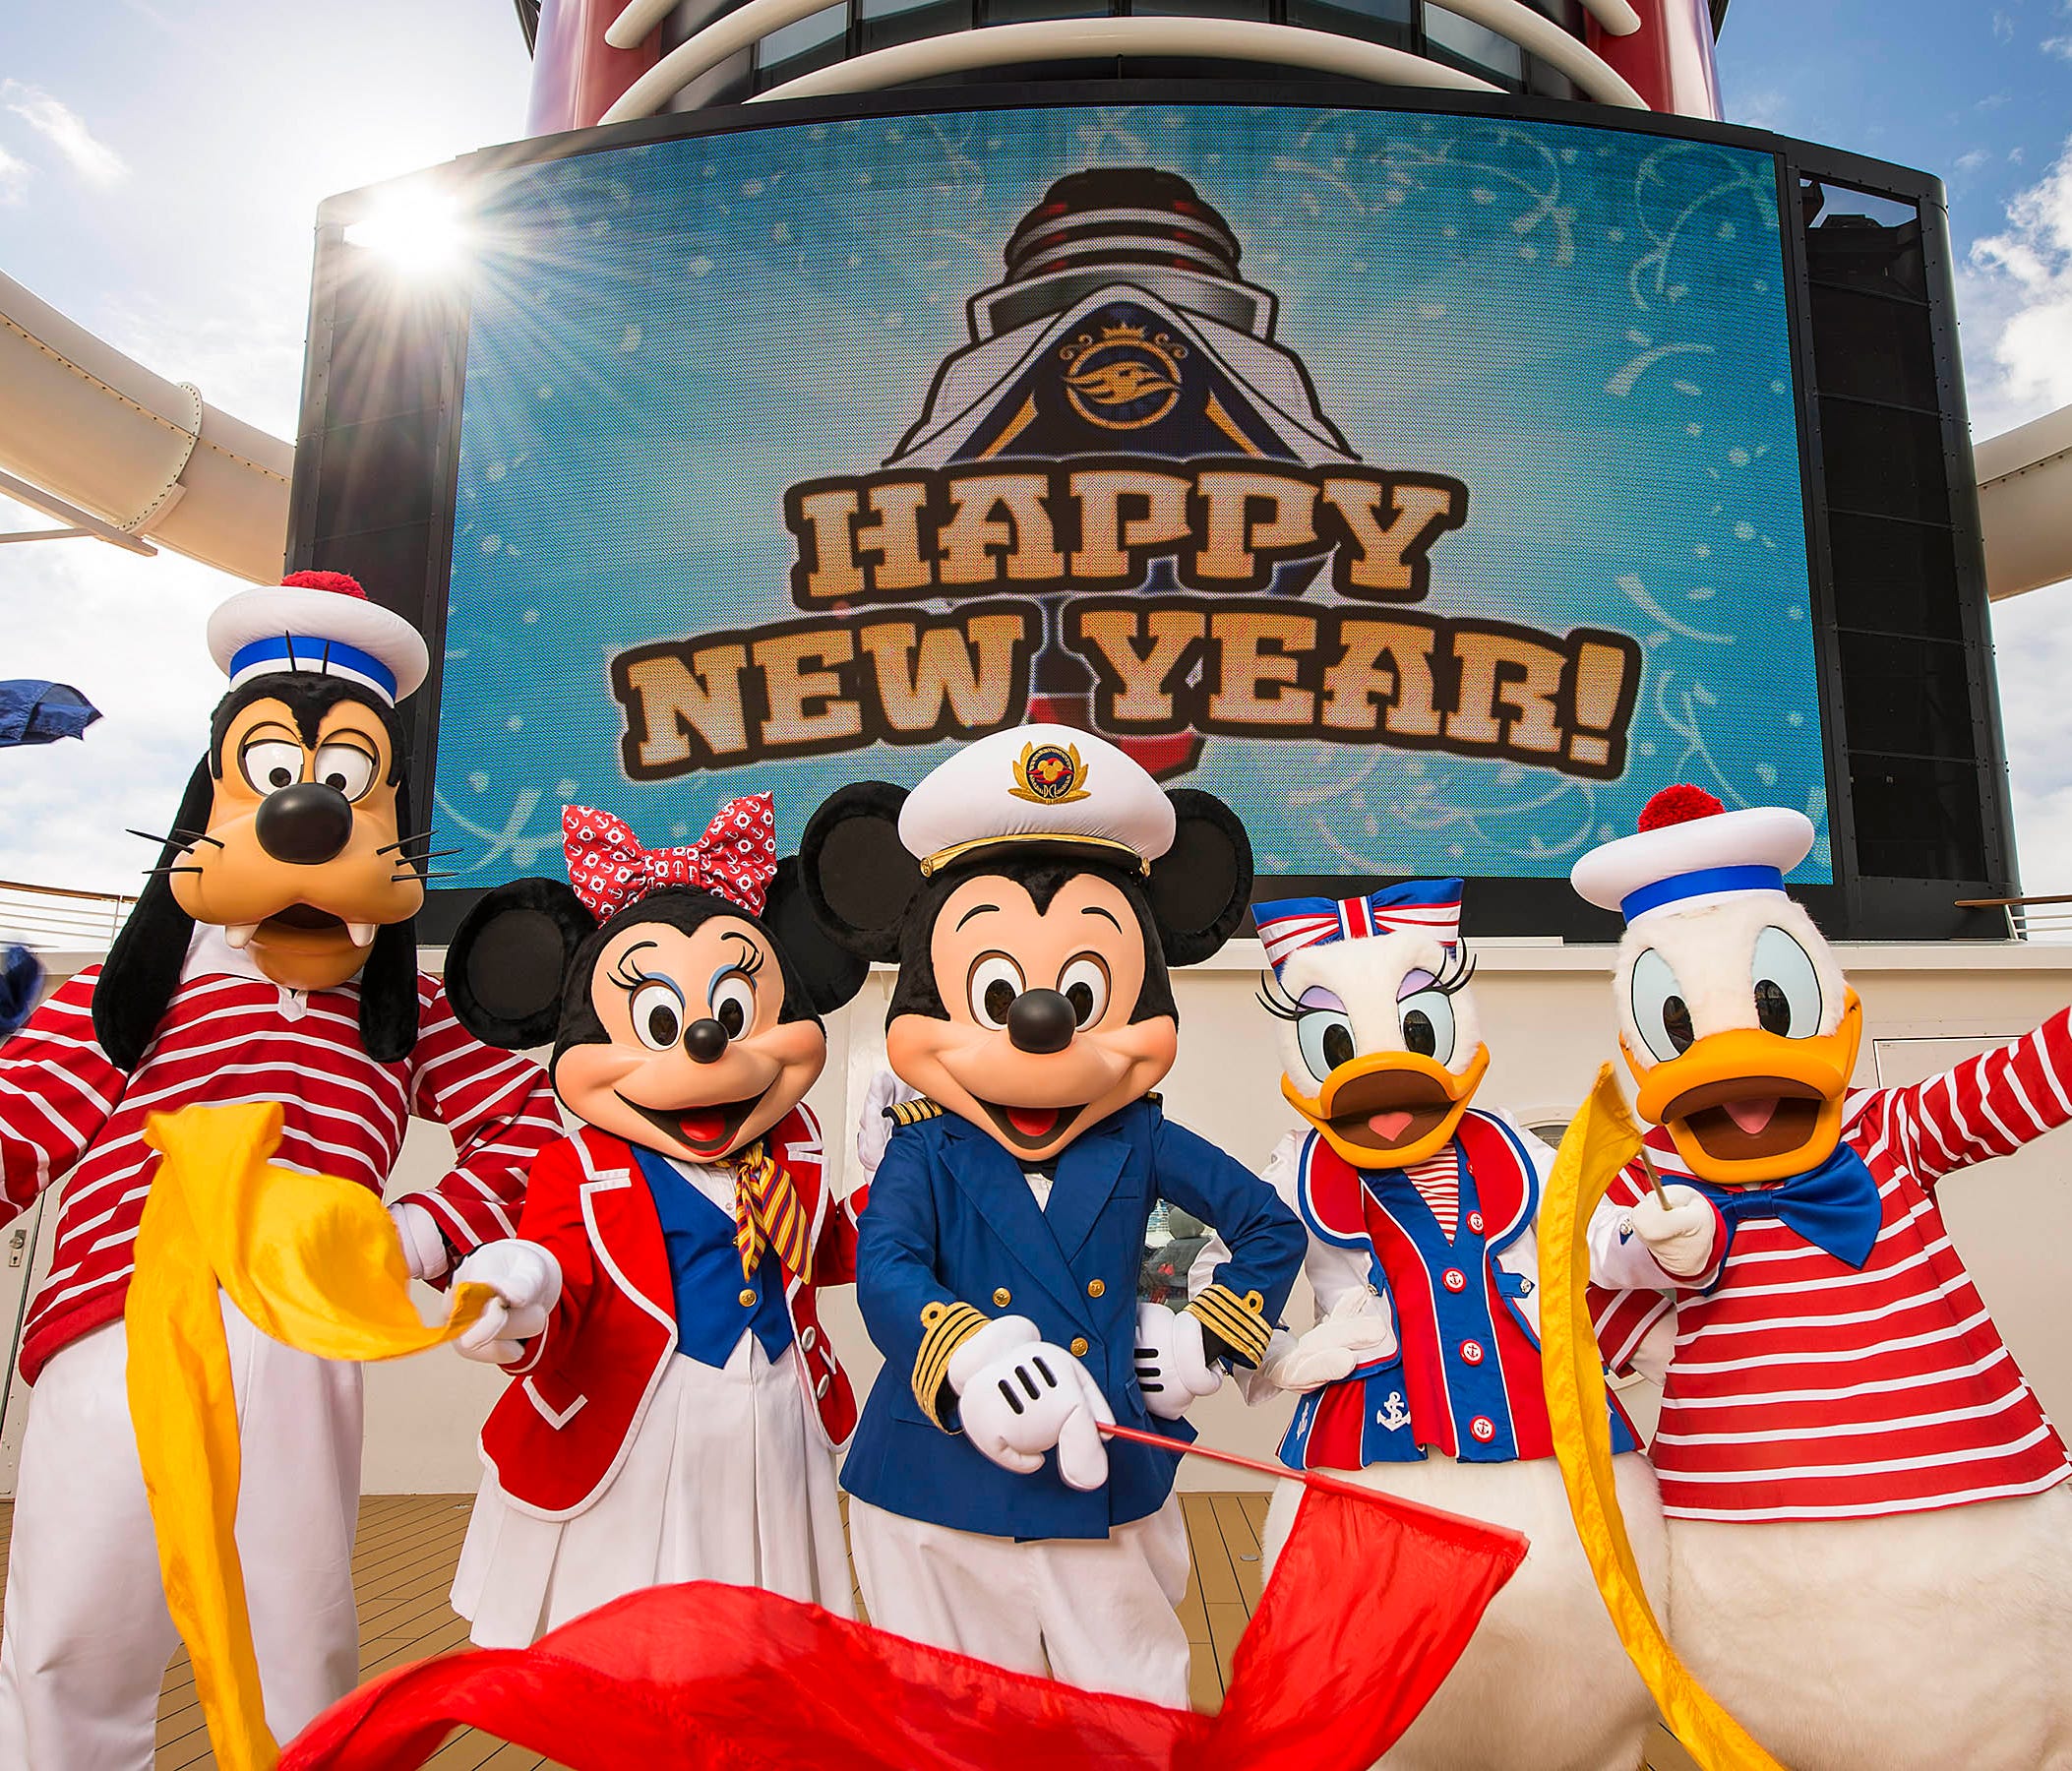 While it's getting late to book, there's still a chance to sail into 2018 on a Disney cruise.